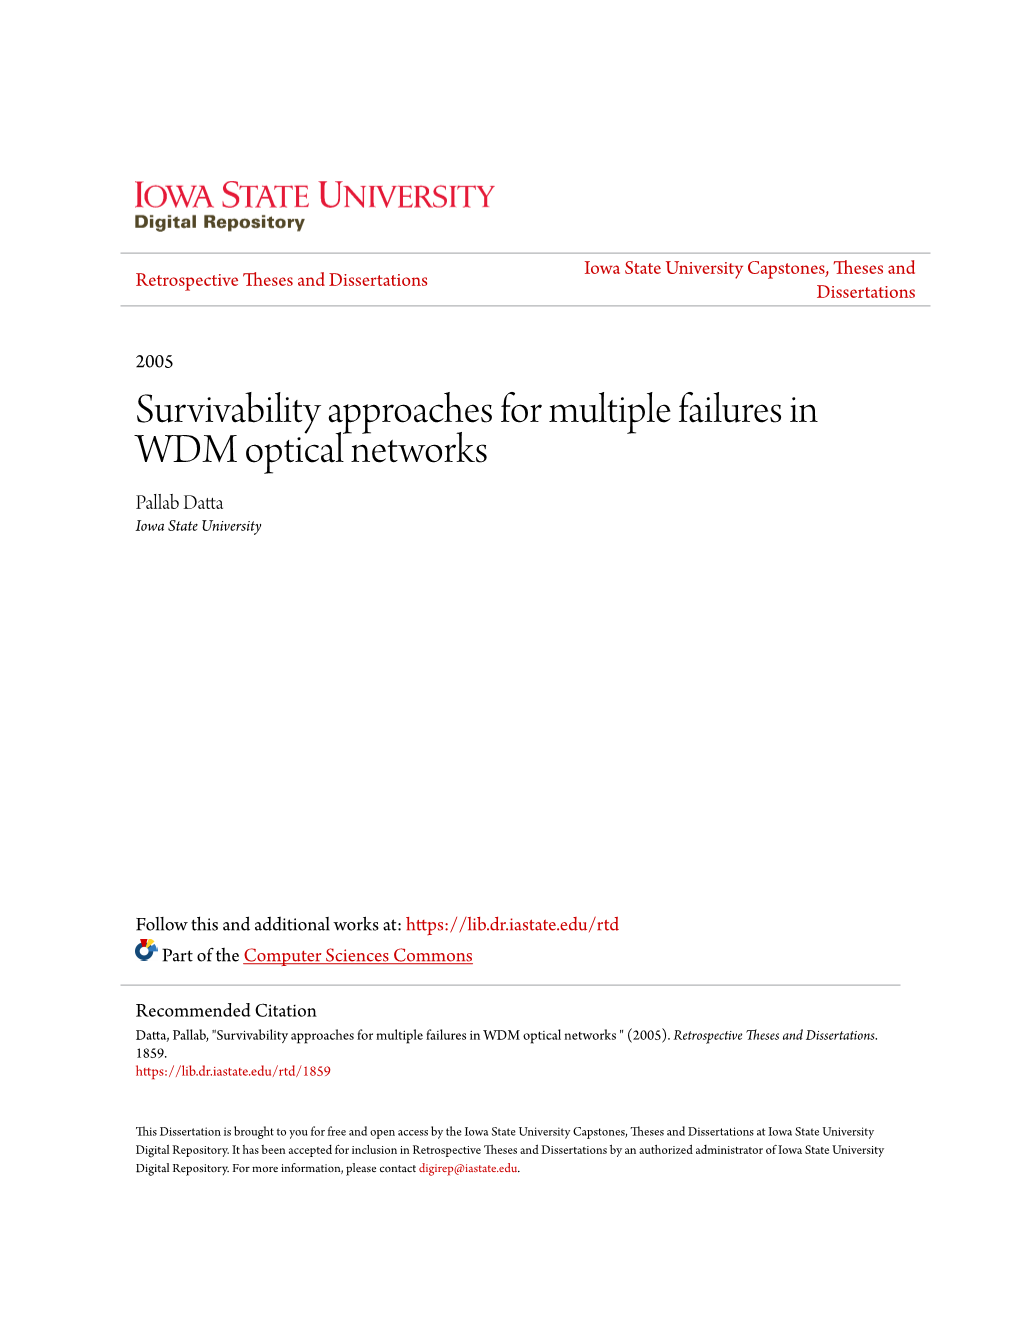 Survivability Approaches for Multiple Failures in WDM Optical Networks Pallab Datta Iowa State University